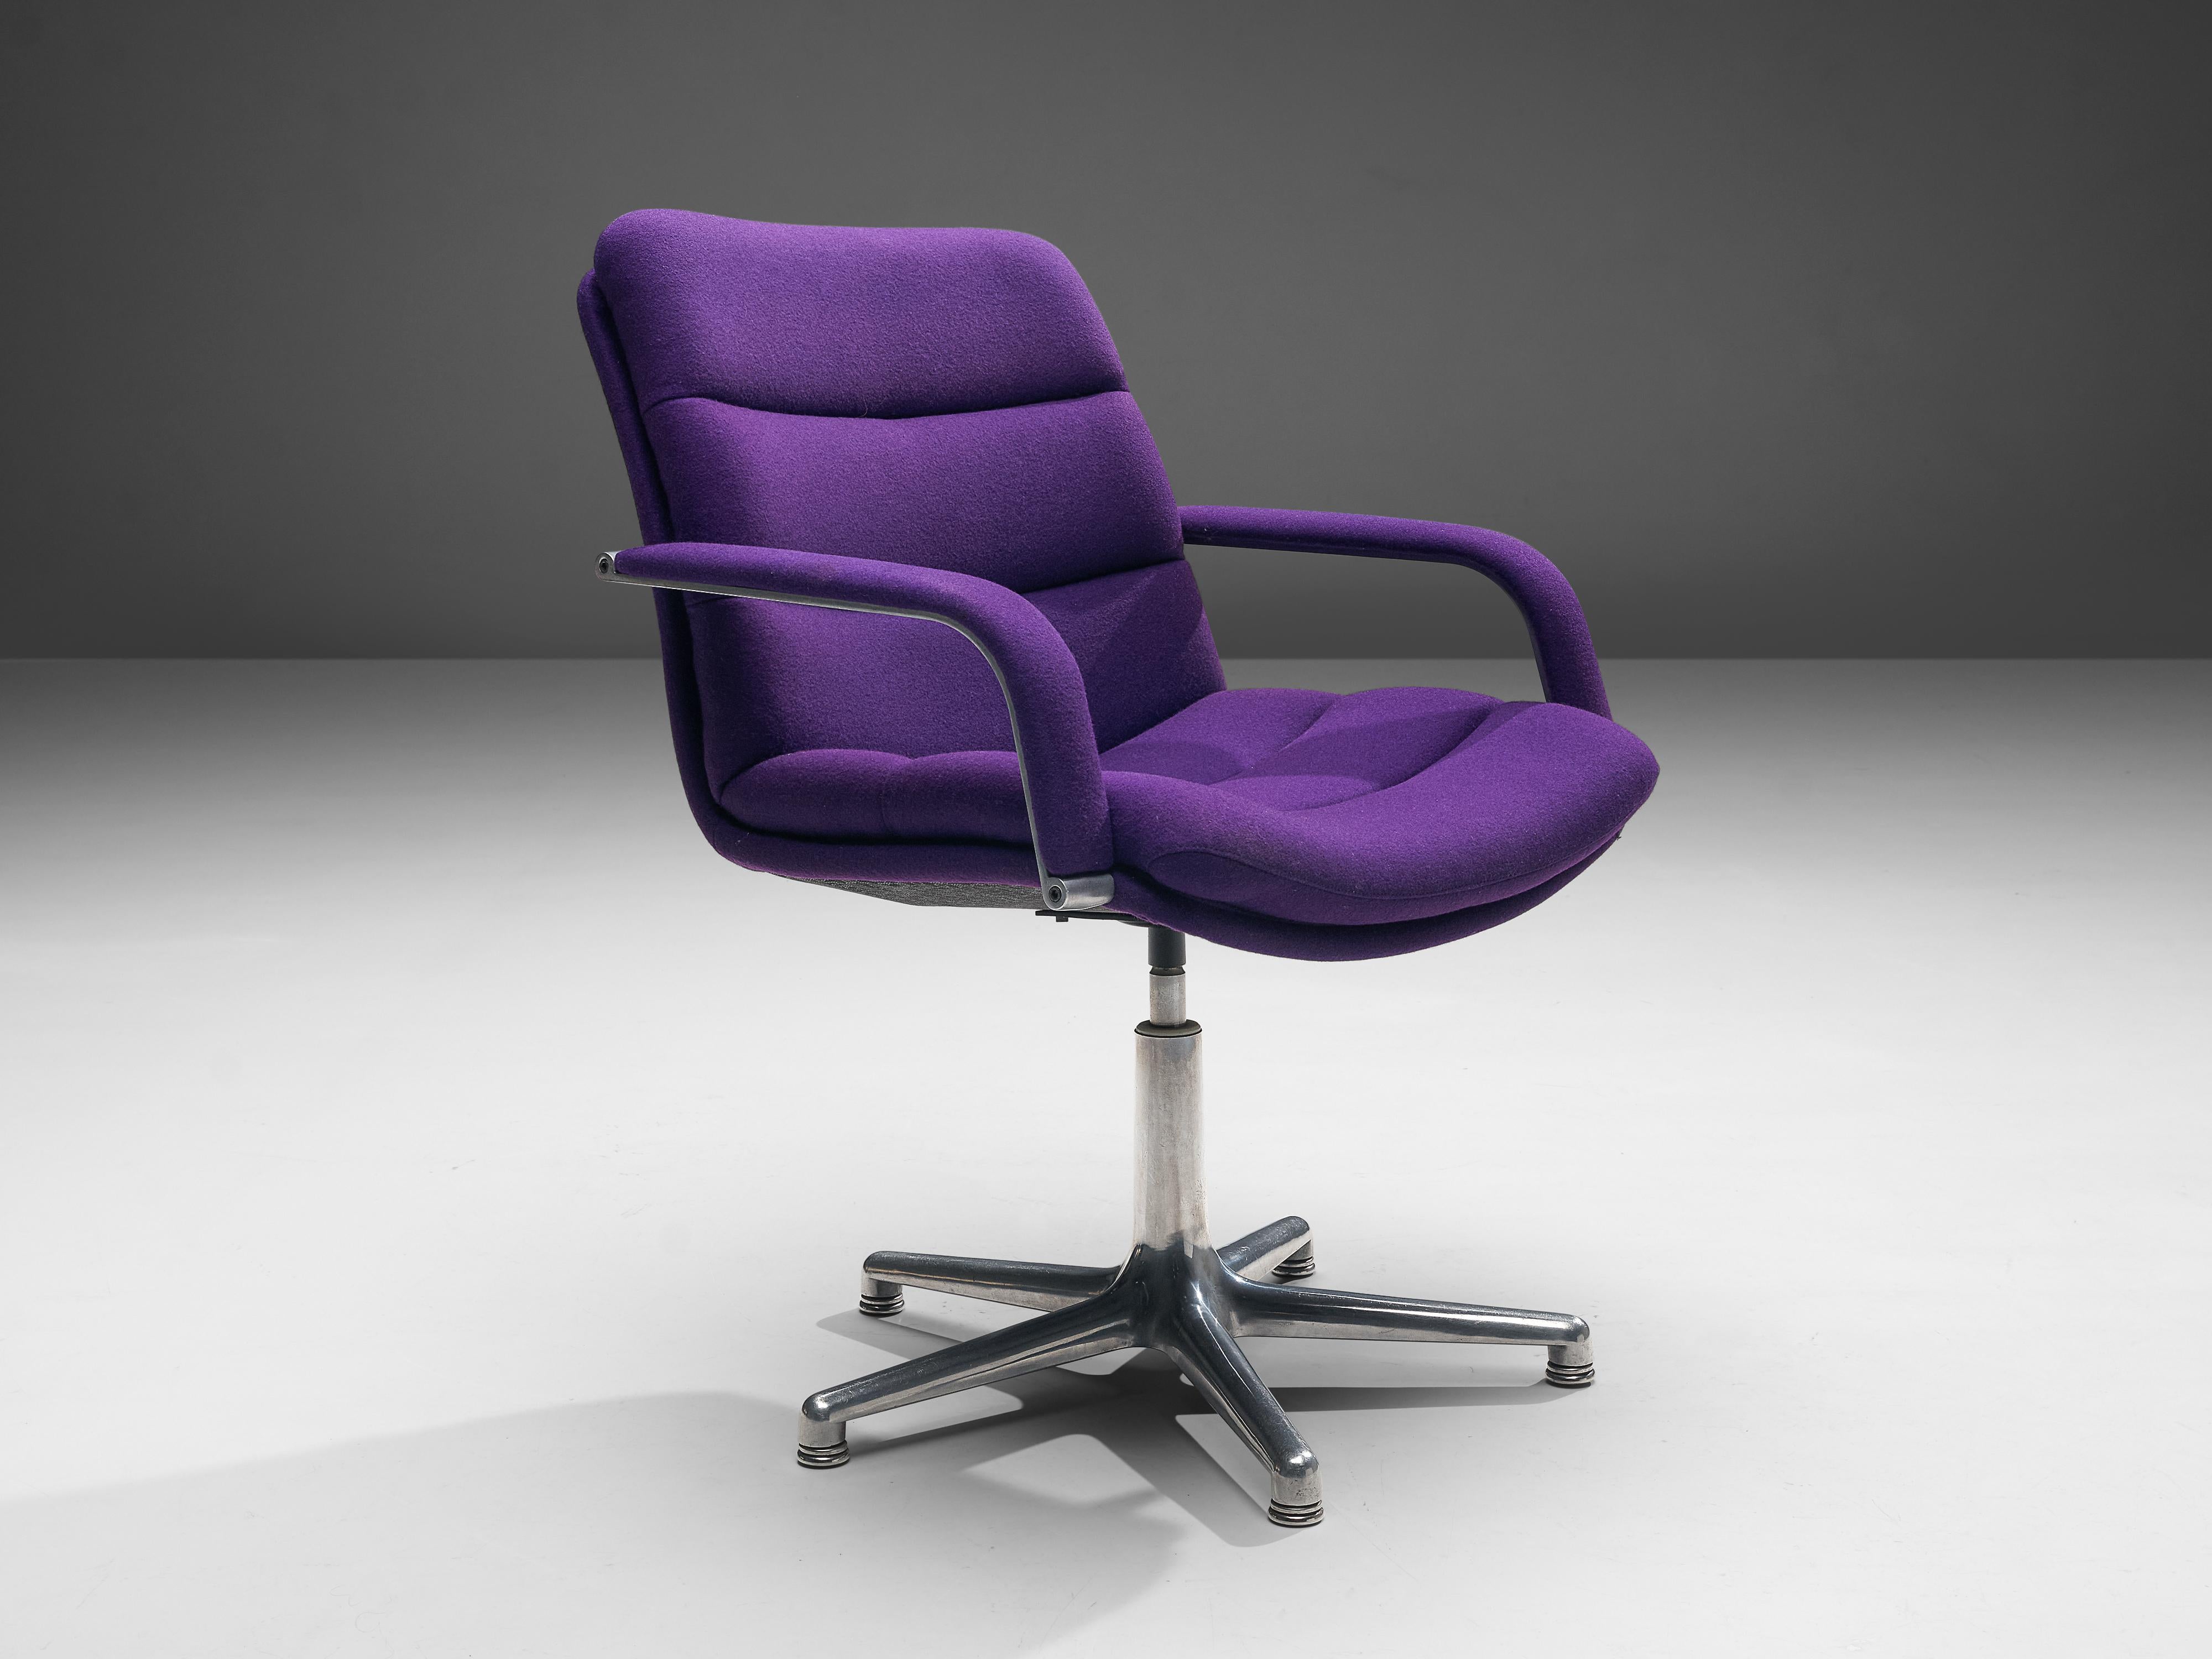 Geoffrey Harcourt for Artifort, office chair, aluminum, upholstery, The Netherlands, 1970s

This office chair was designed by Geoffrey Harcourt manufactured by Artifort in the seventies. The comfortable chair hasan aluminum five-toe base.